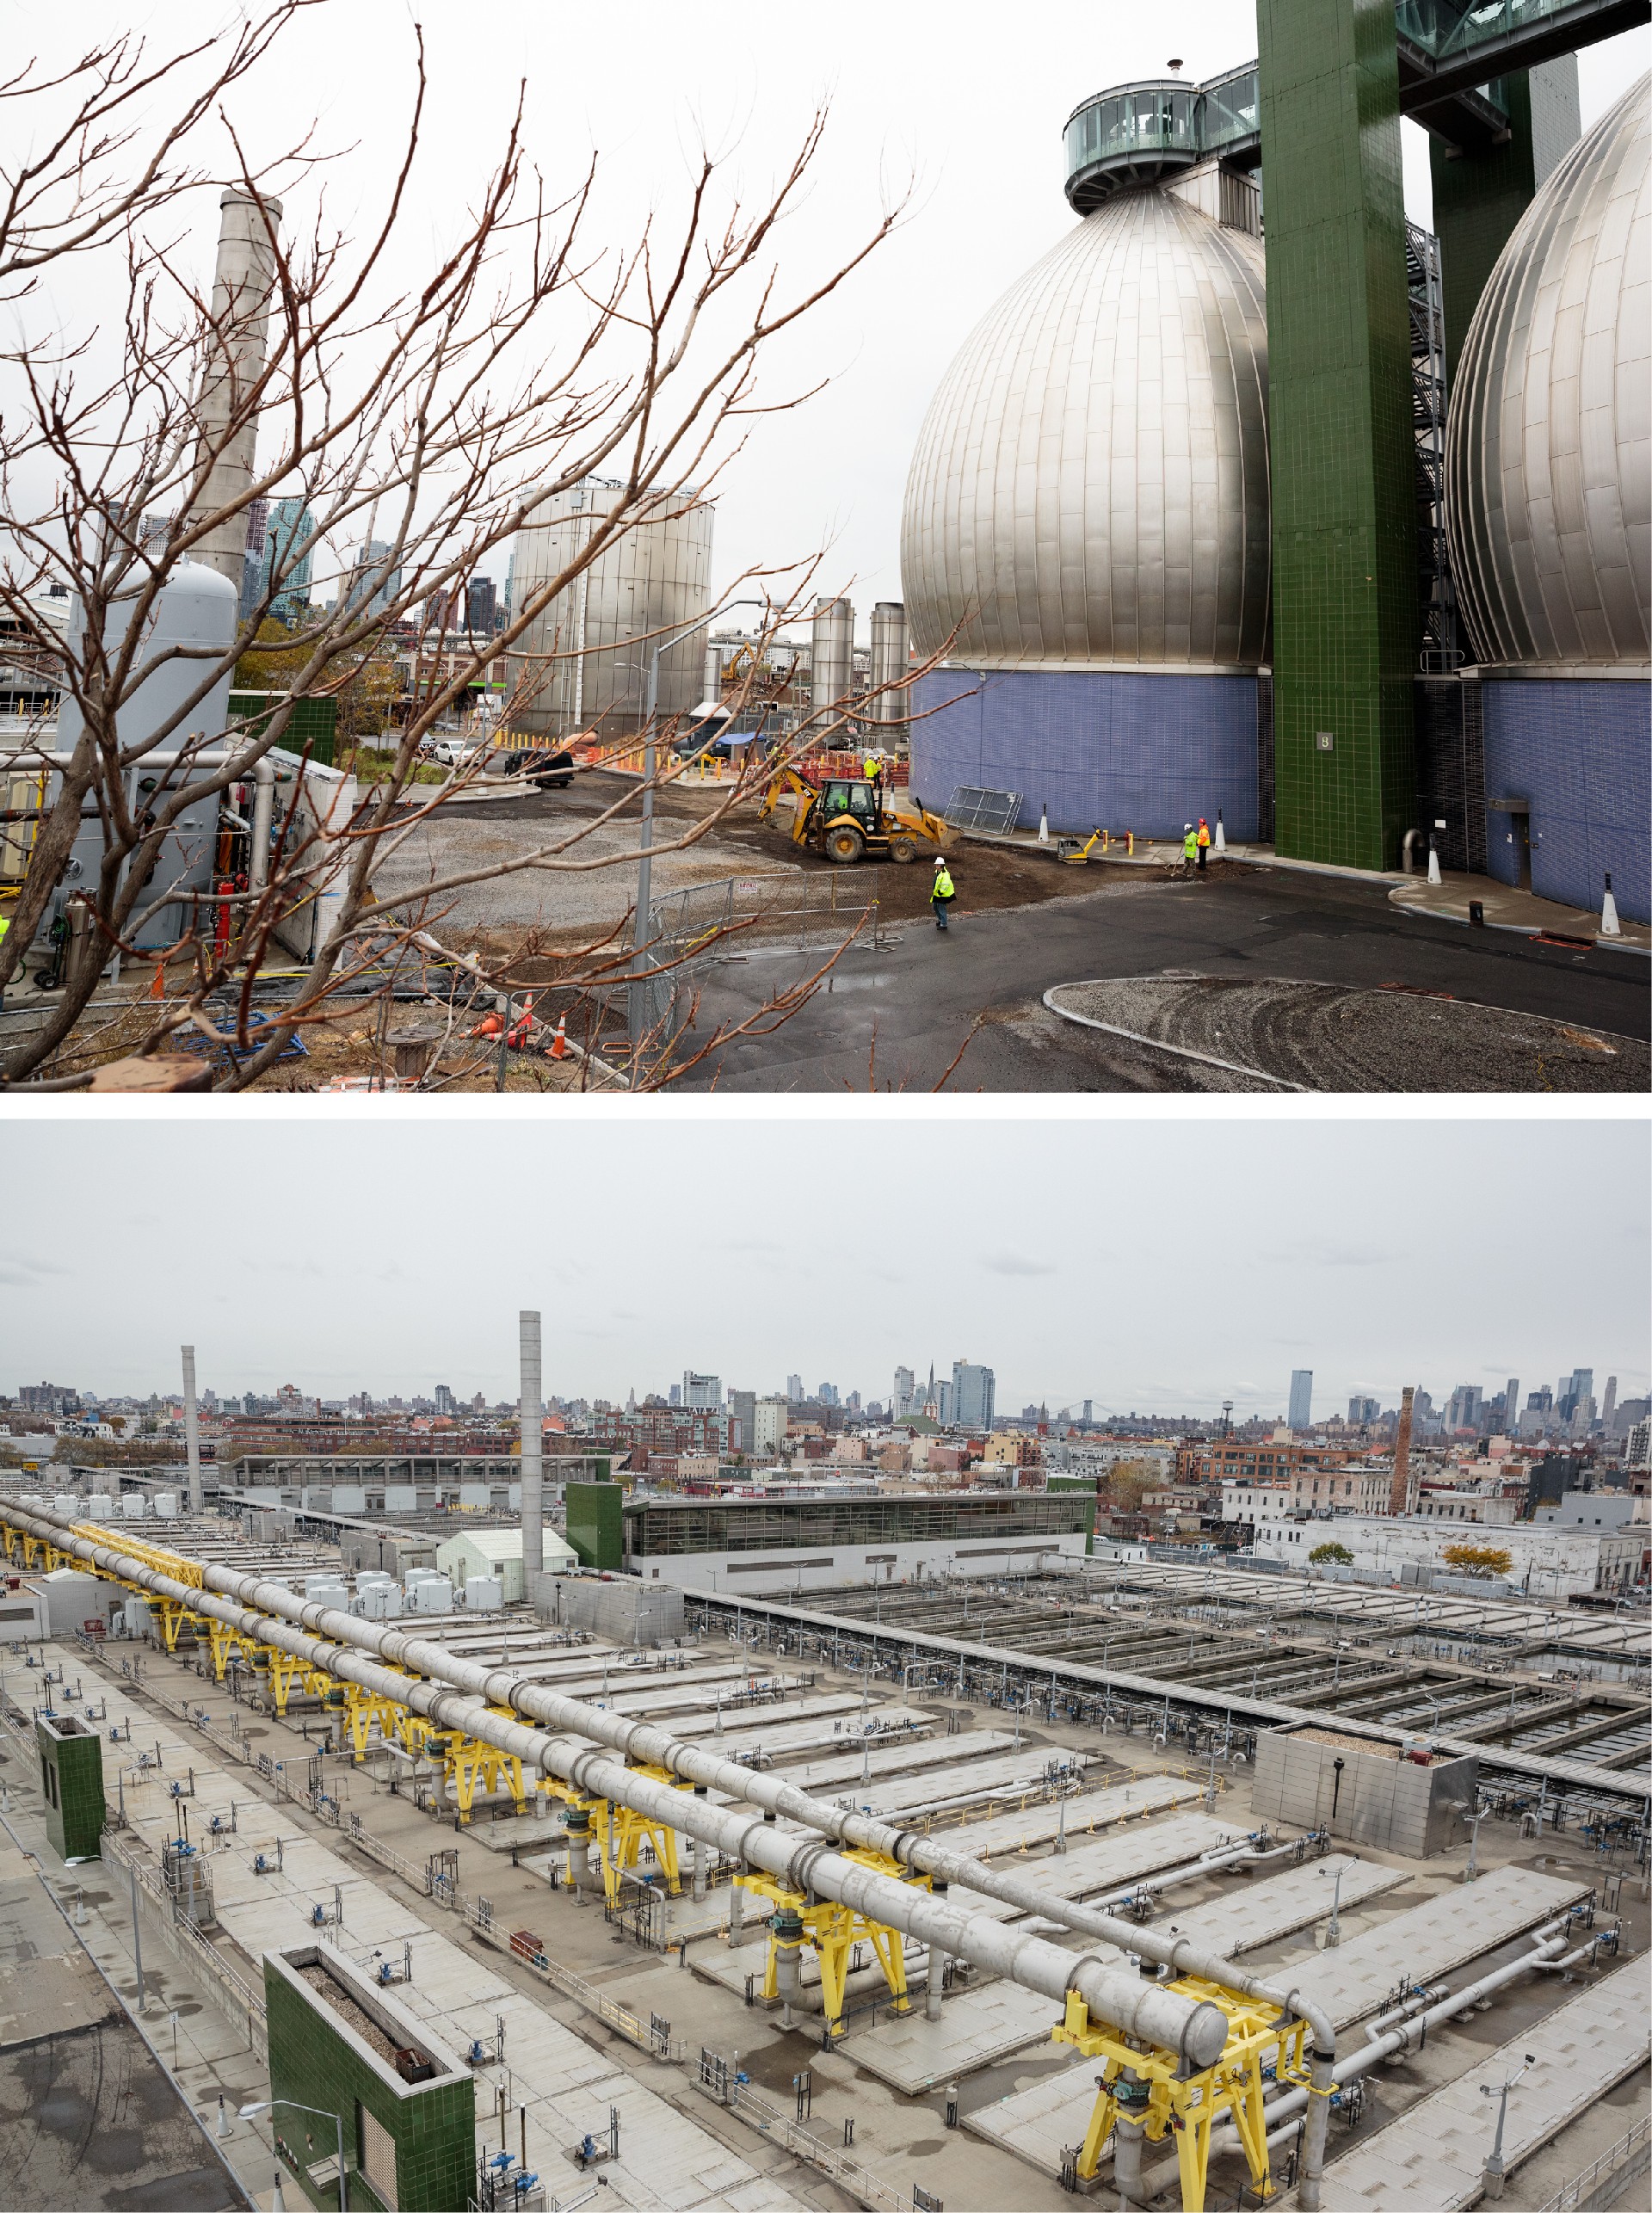 Top: Construction for the "waste to gas" initiative at the Newtown Creek Wastewater Treatment Plant in Brooklyn. Bottom: A view of the "setting tanks" inside the plant.